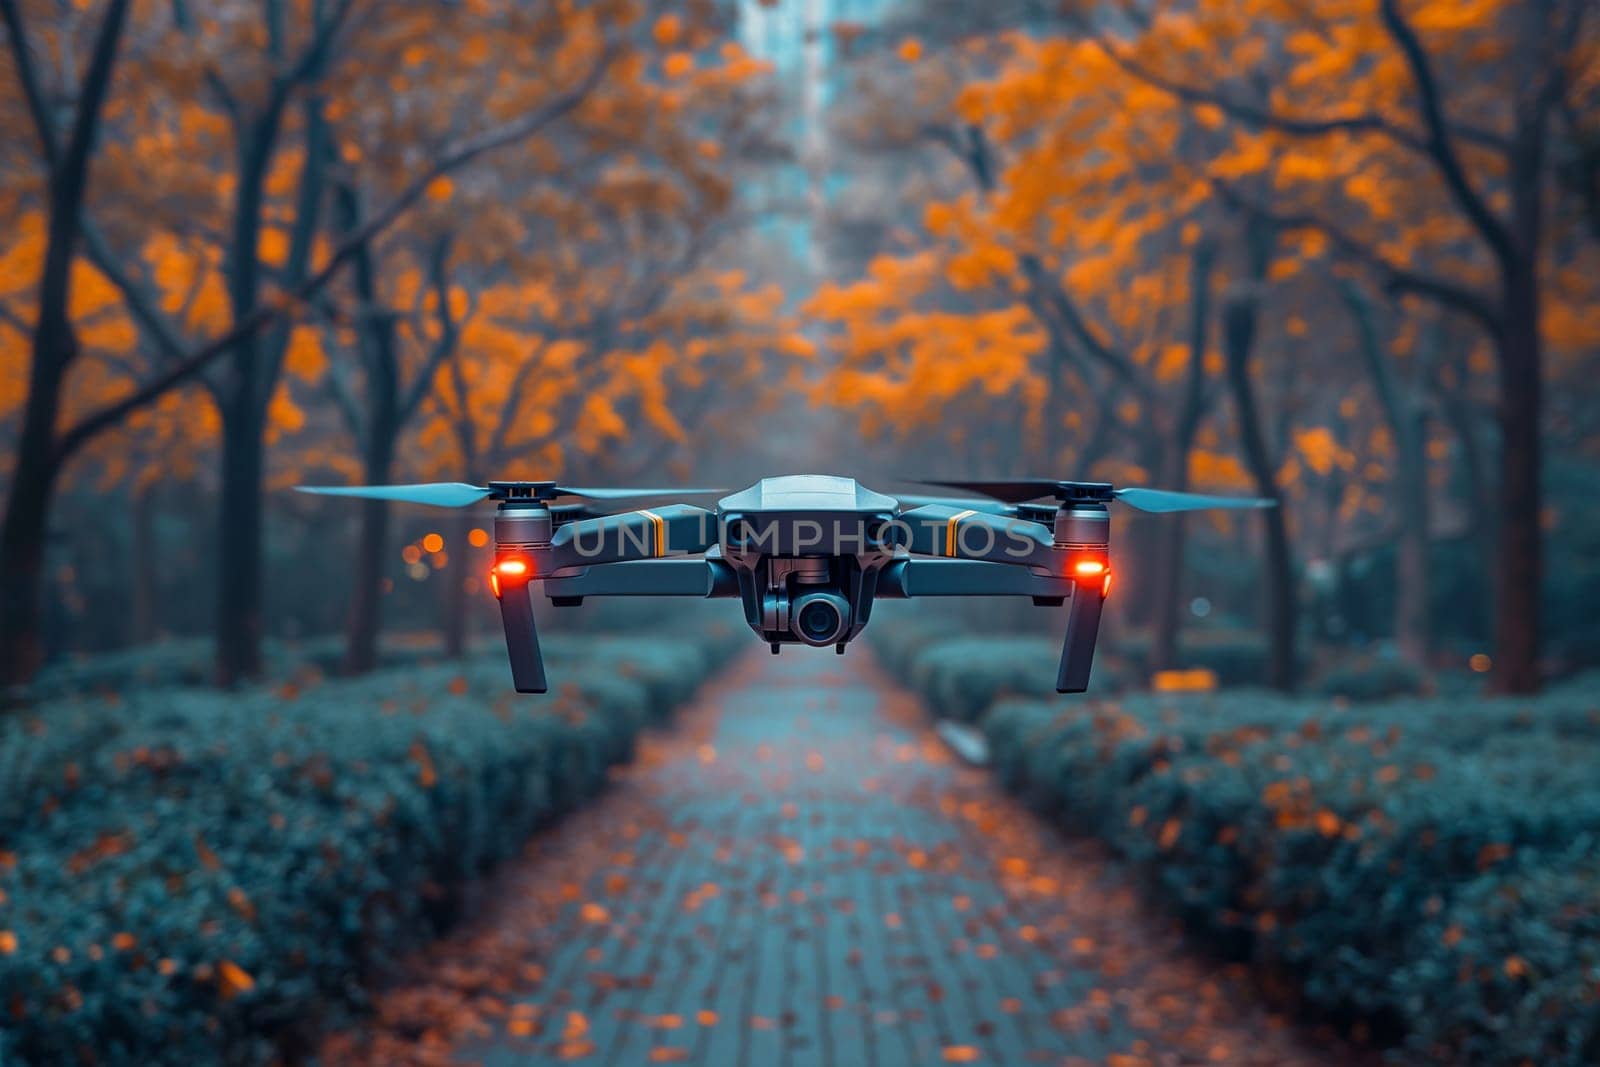 A black and white camera drone hovers above a dense forest, capturing the landscape below with a birds eye view.